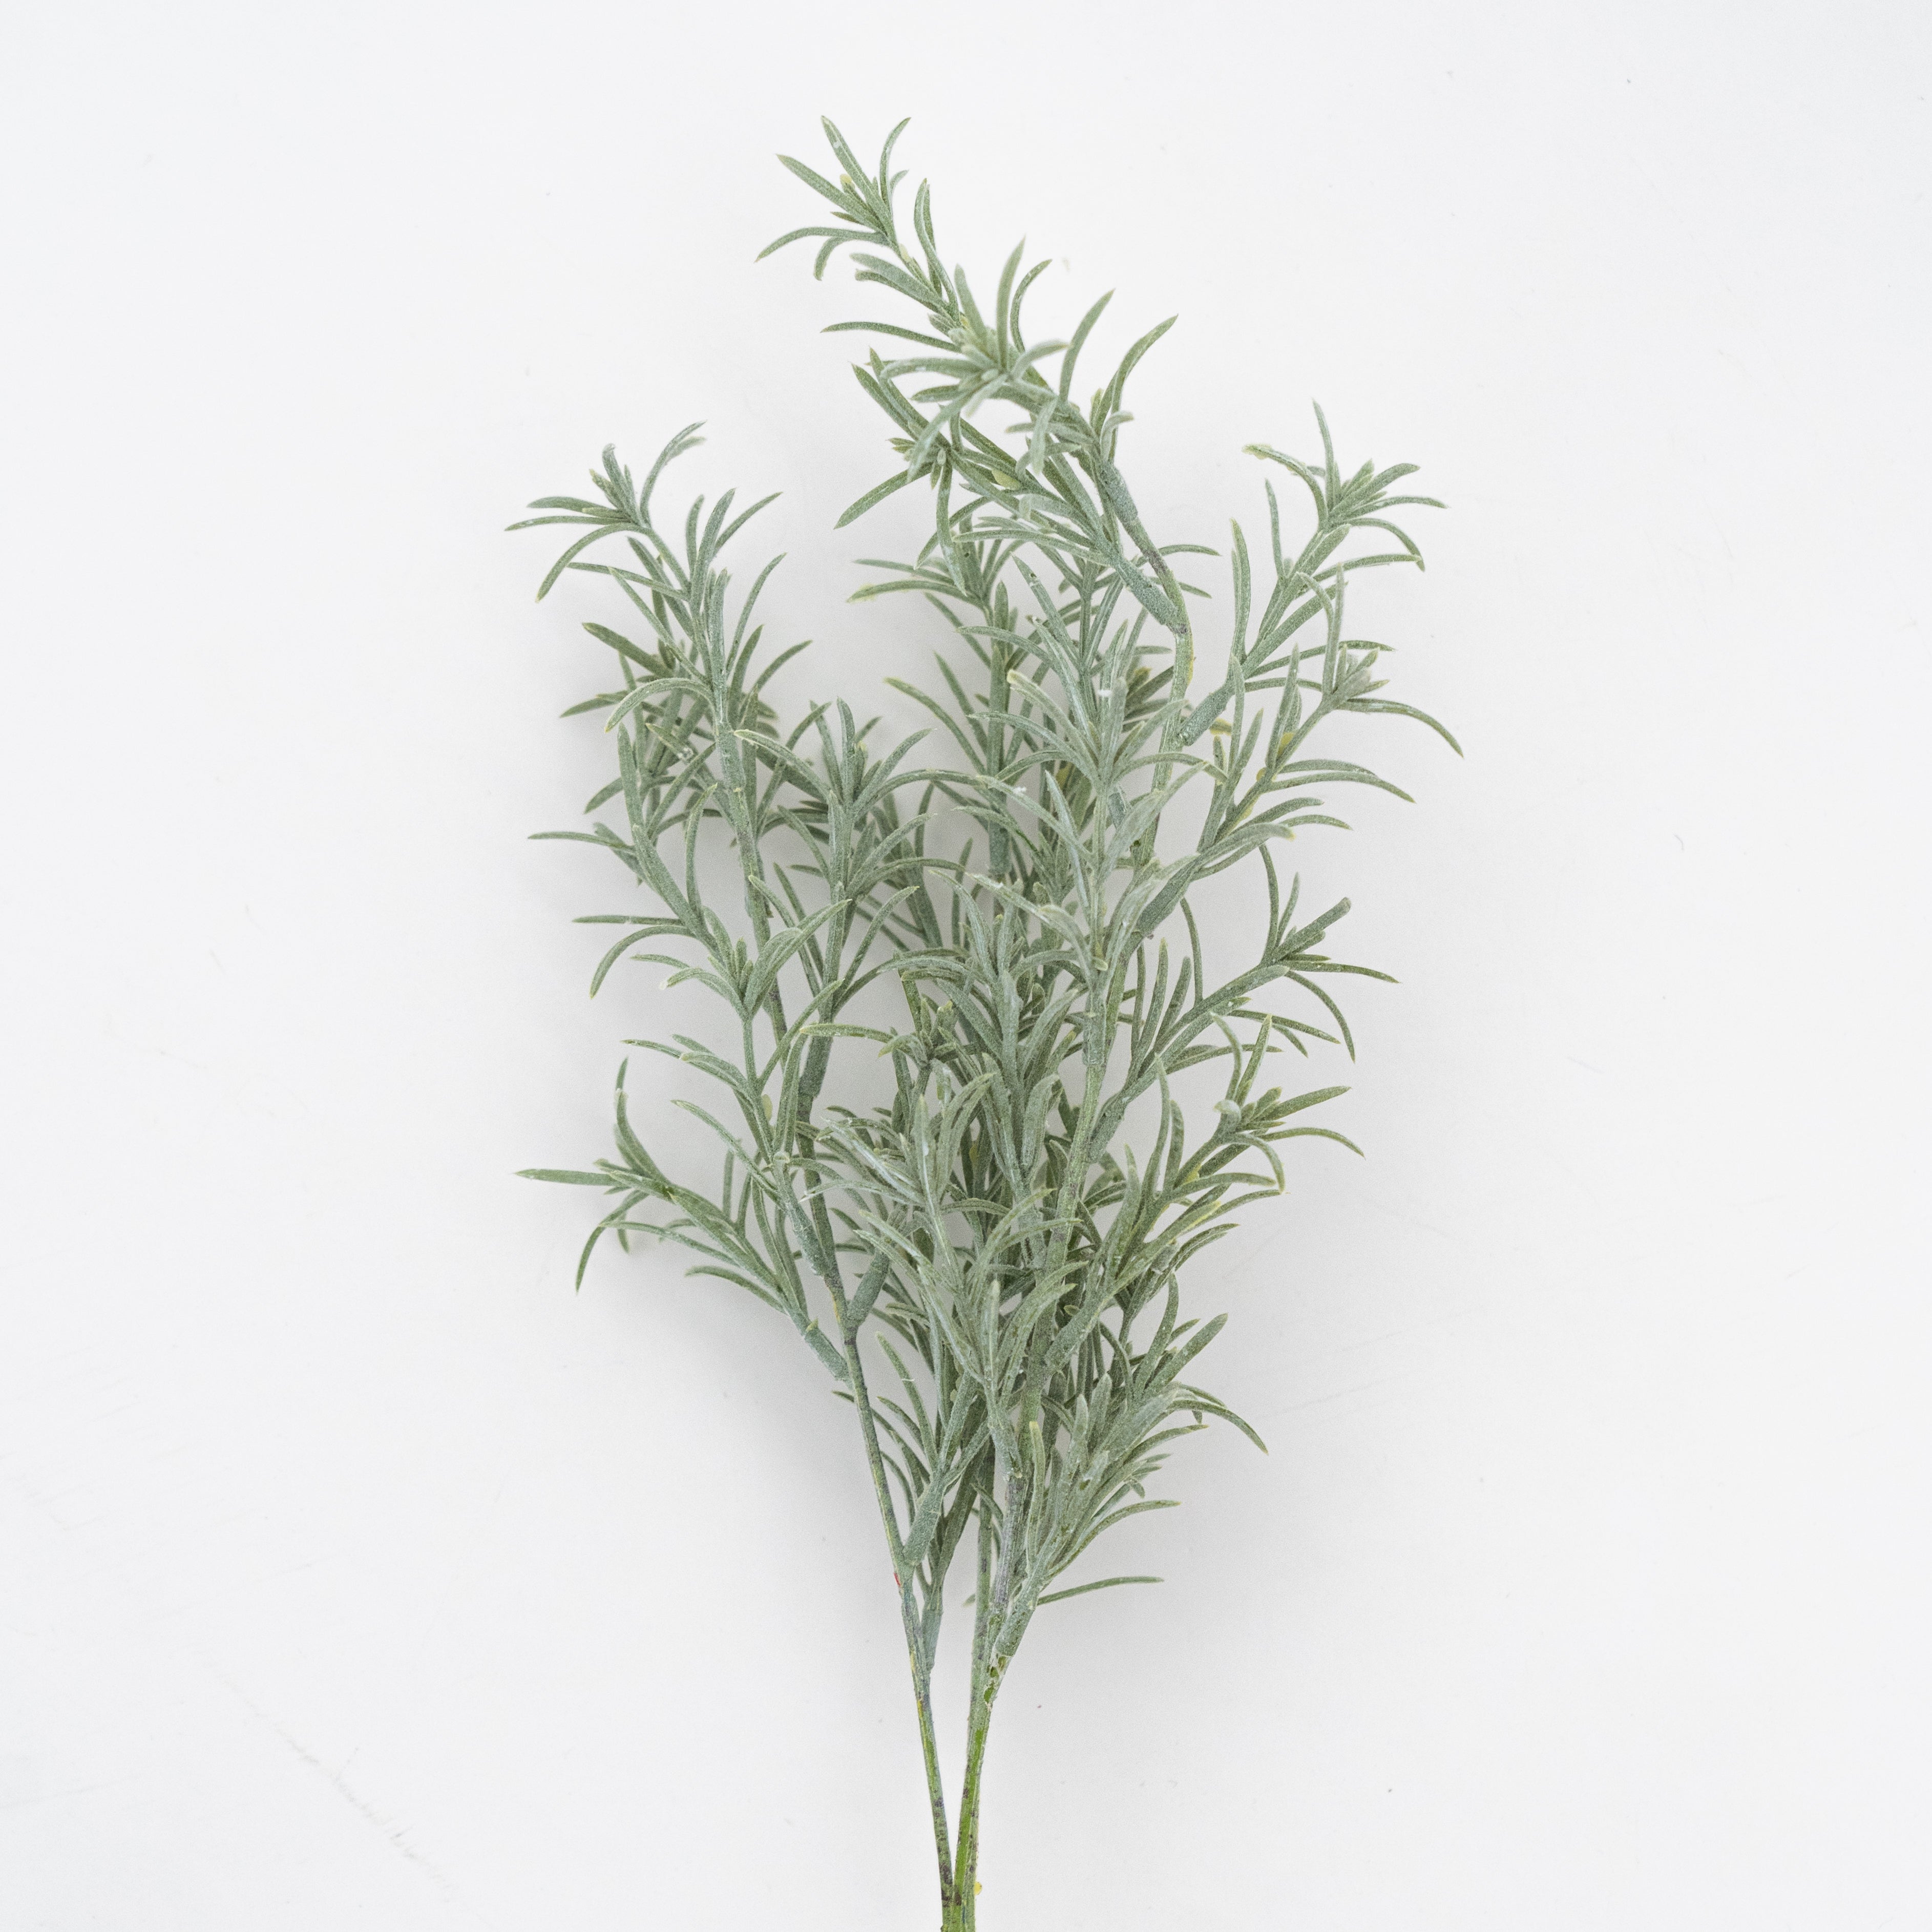 Artificial Plant - Lavender Herb  - WS Living - UAE - Artificial Flowers Wood and steel Furnitures - Dubai